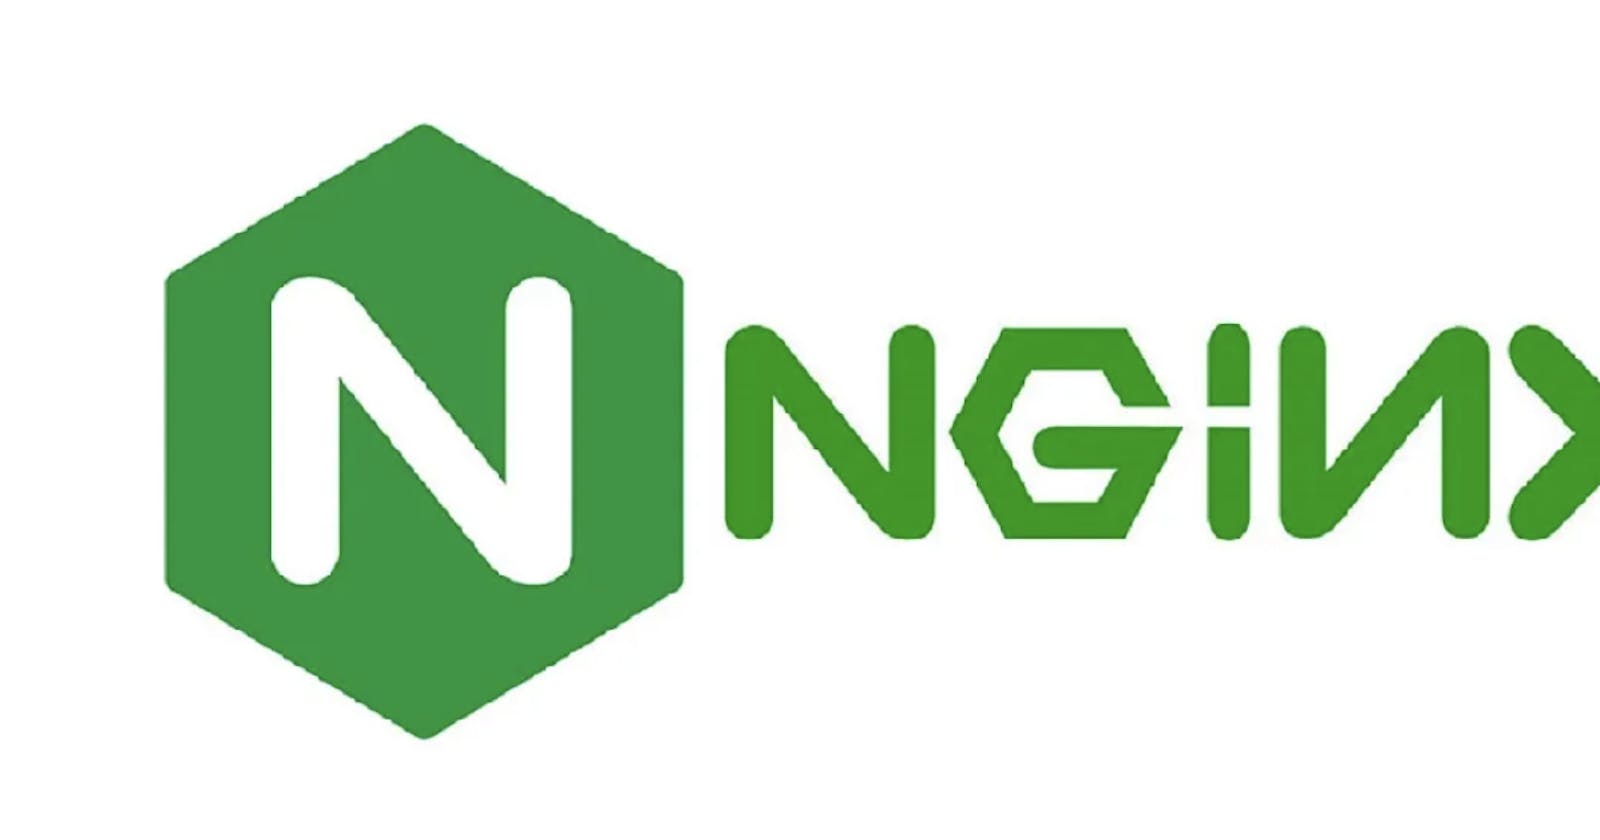 What is nginx and Deploy python application on nginx server.